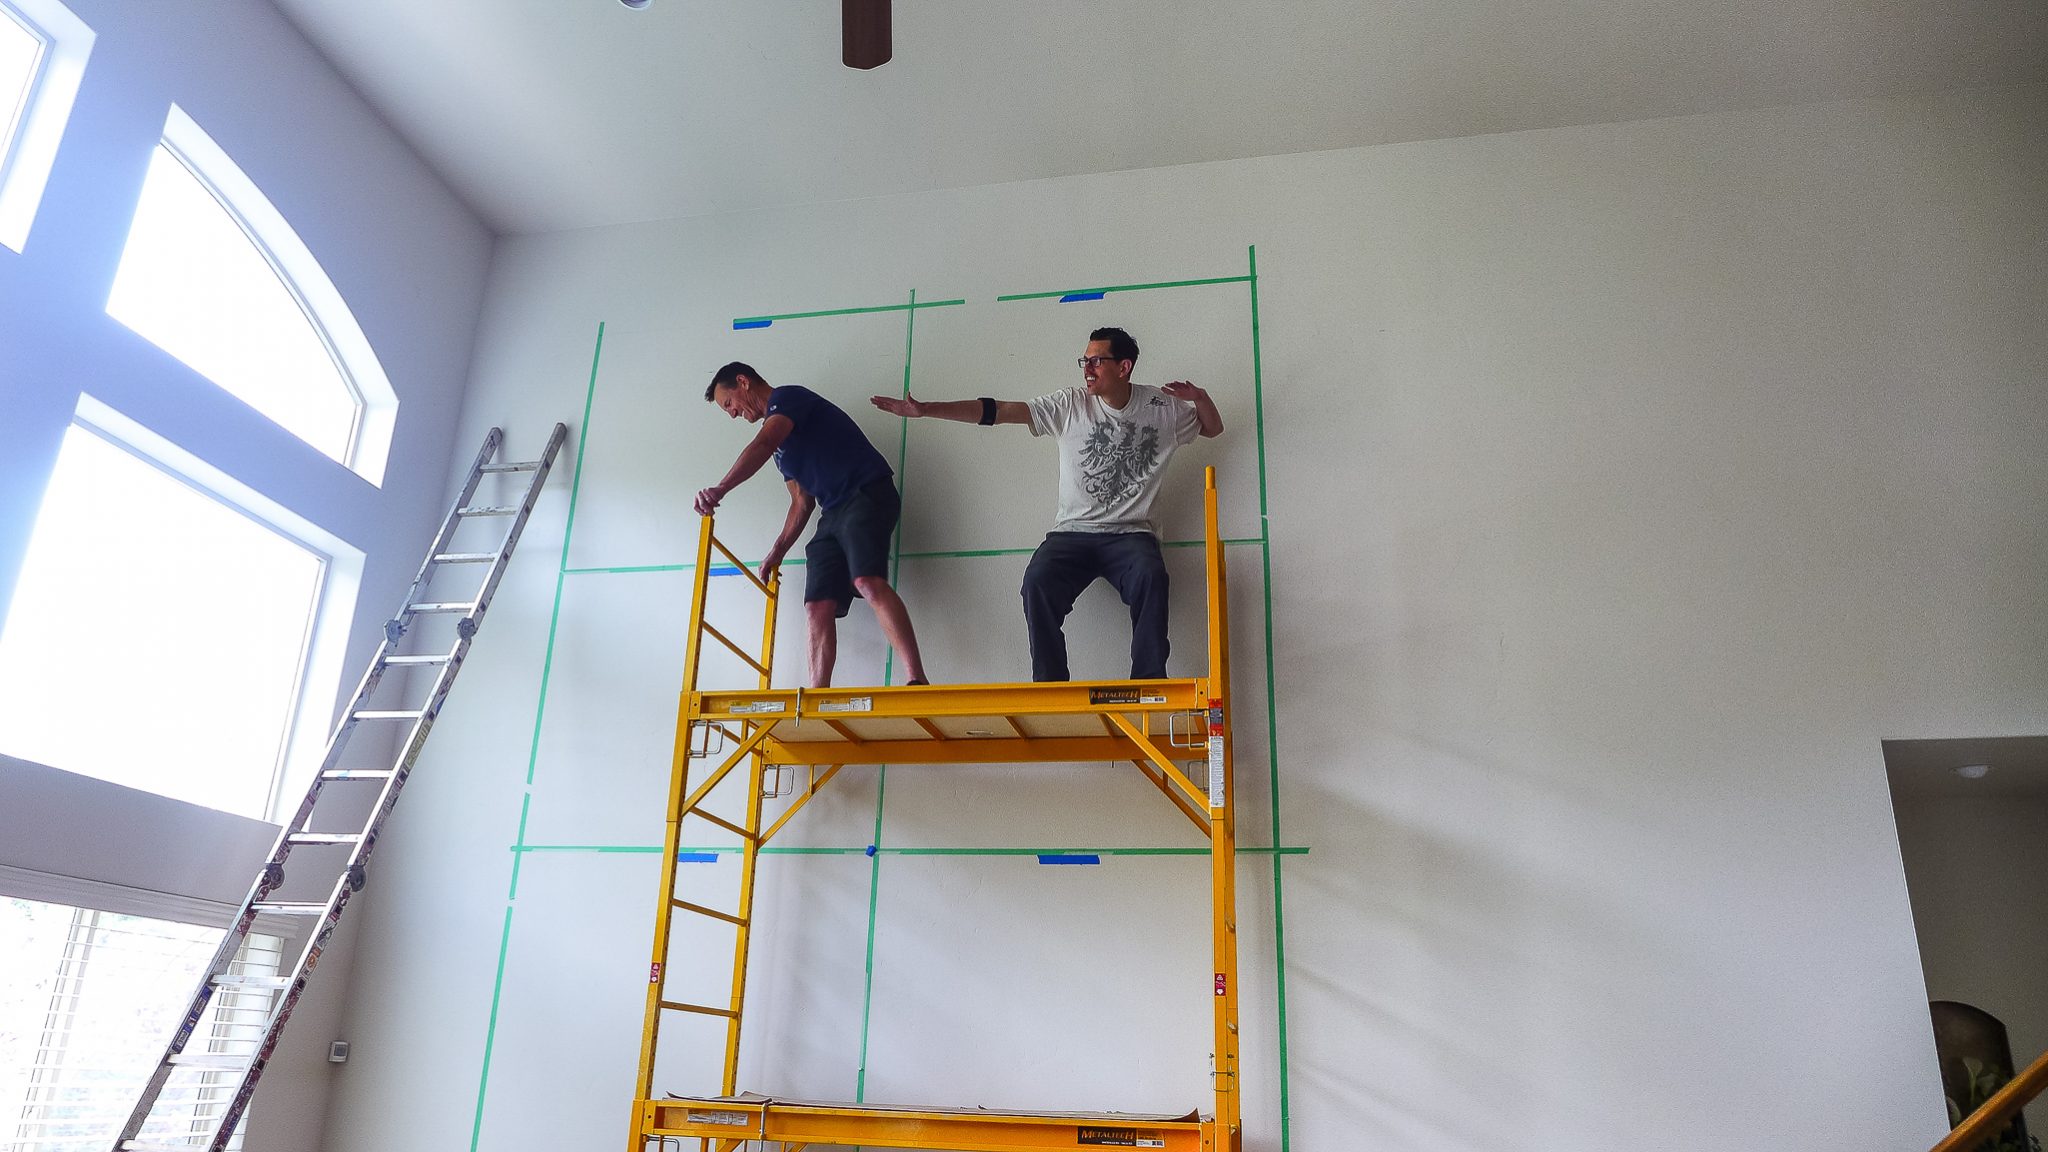 mike bowen and don bowen surfing scaffolding